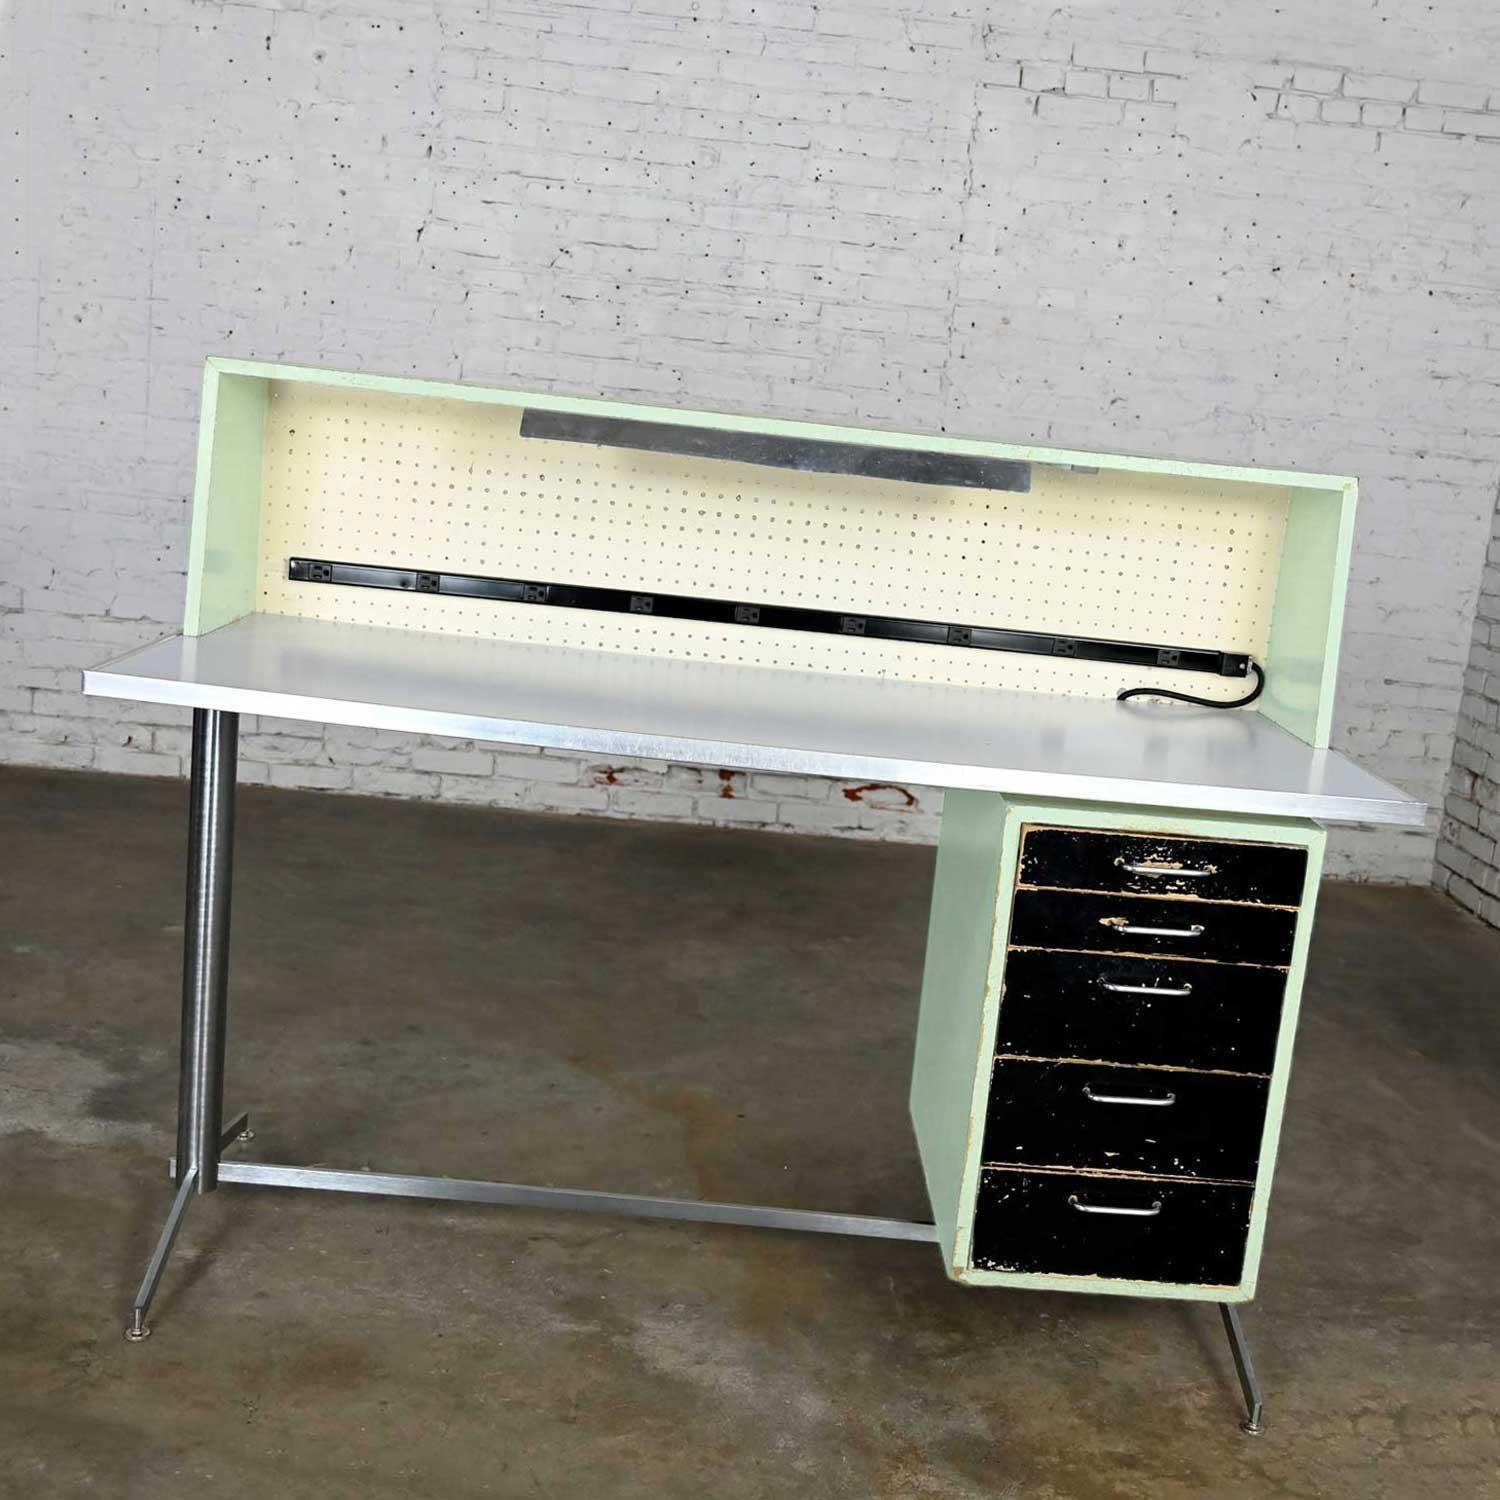 Fabulous industrial Mid-Century Modern distressed stand-up desk or worktable by American Optical Consul Furniture Line. Comprised of a brushed stainless frame and legs, particle board, white laminate tabletop, aluminum edging, peg board, lights, and